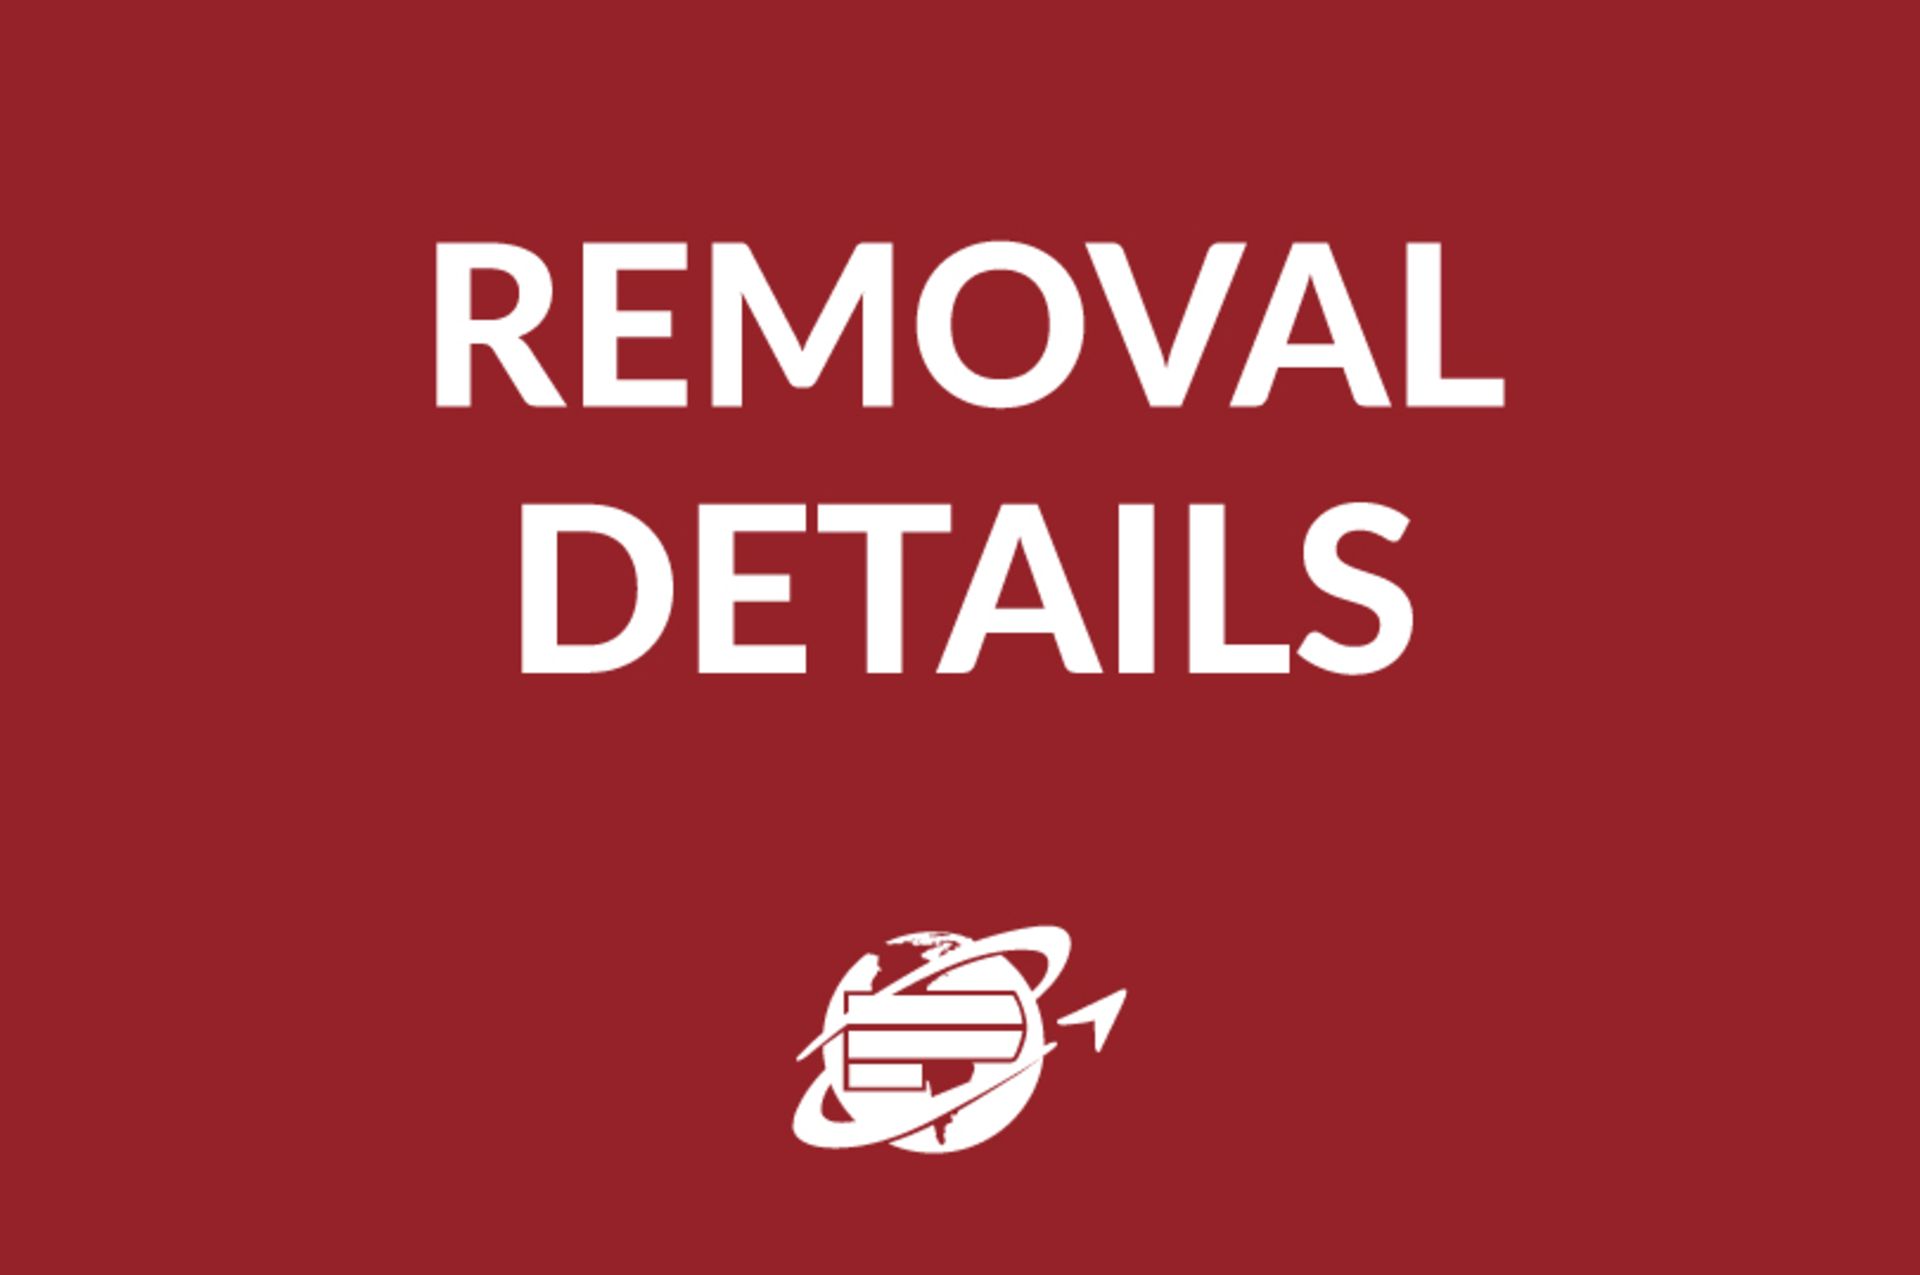 All items must be removed no later than Friday, September 29. All removal is strictly